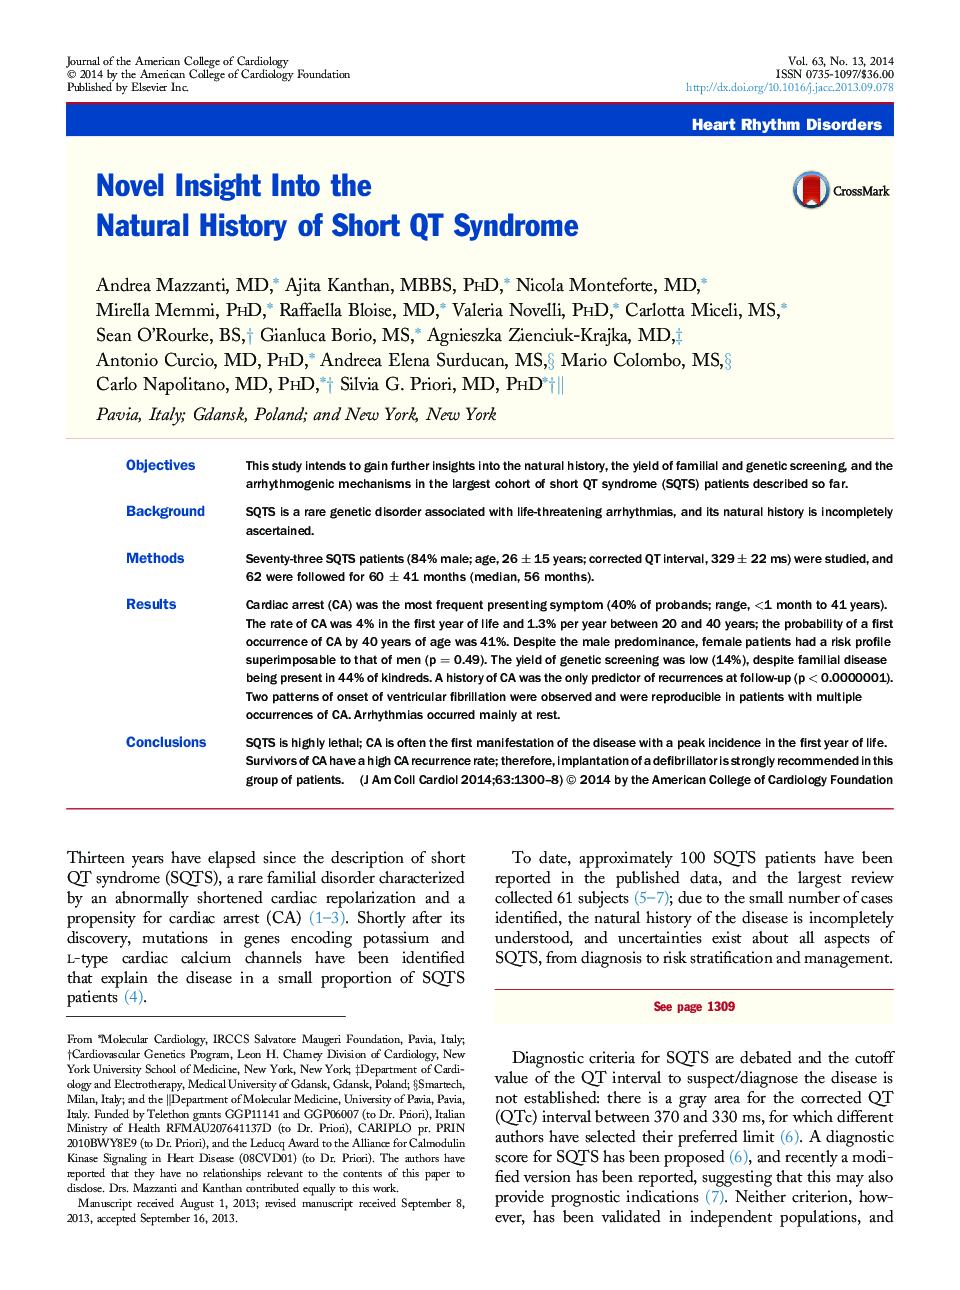 Novel Insight Into the Natural History of Short QT Syndrome